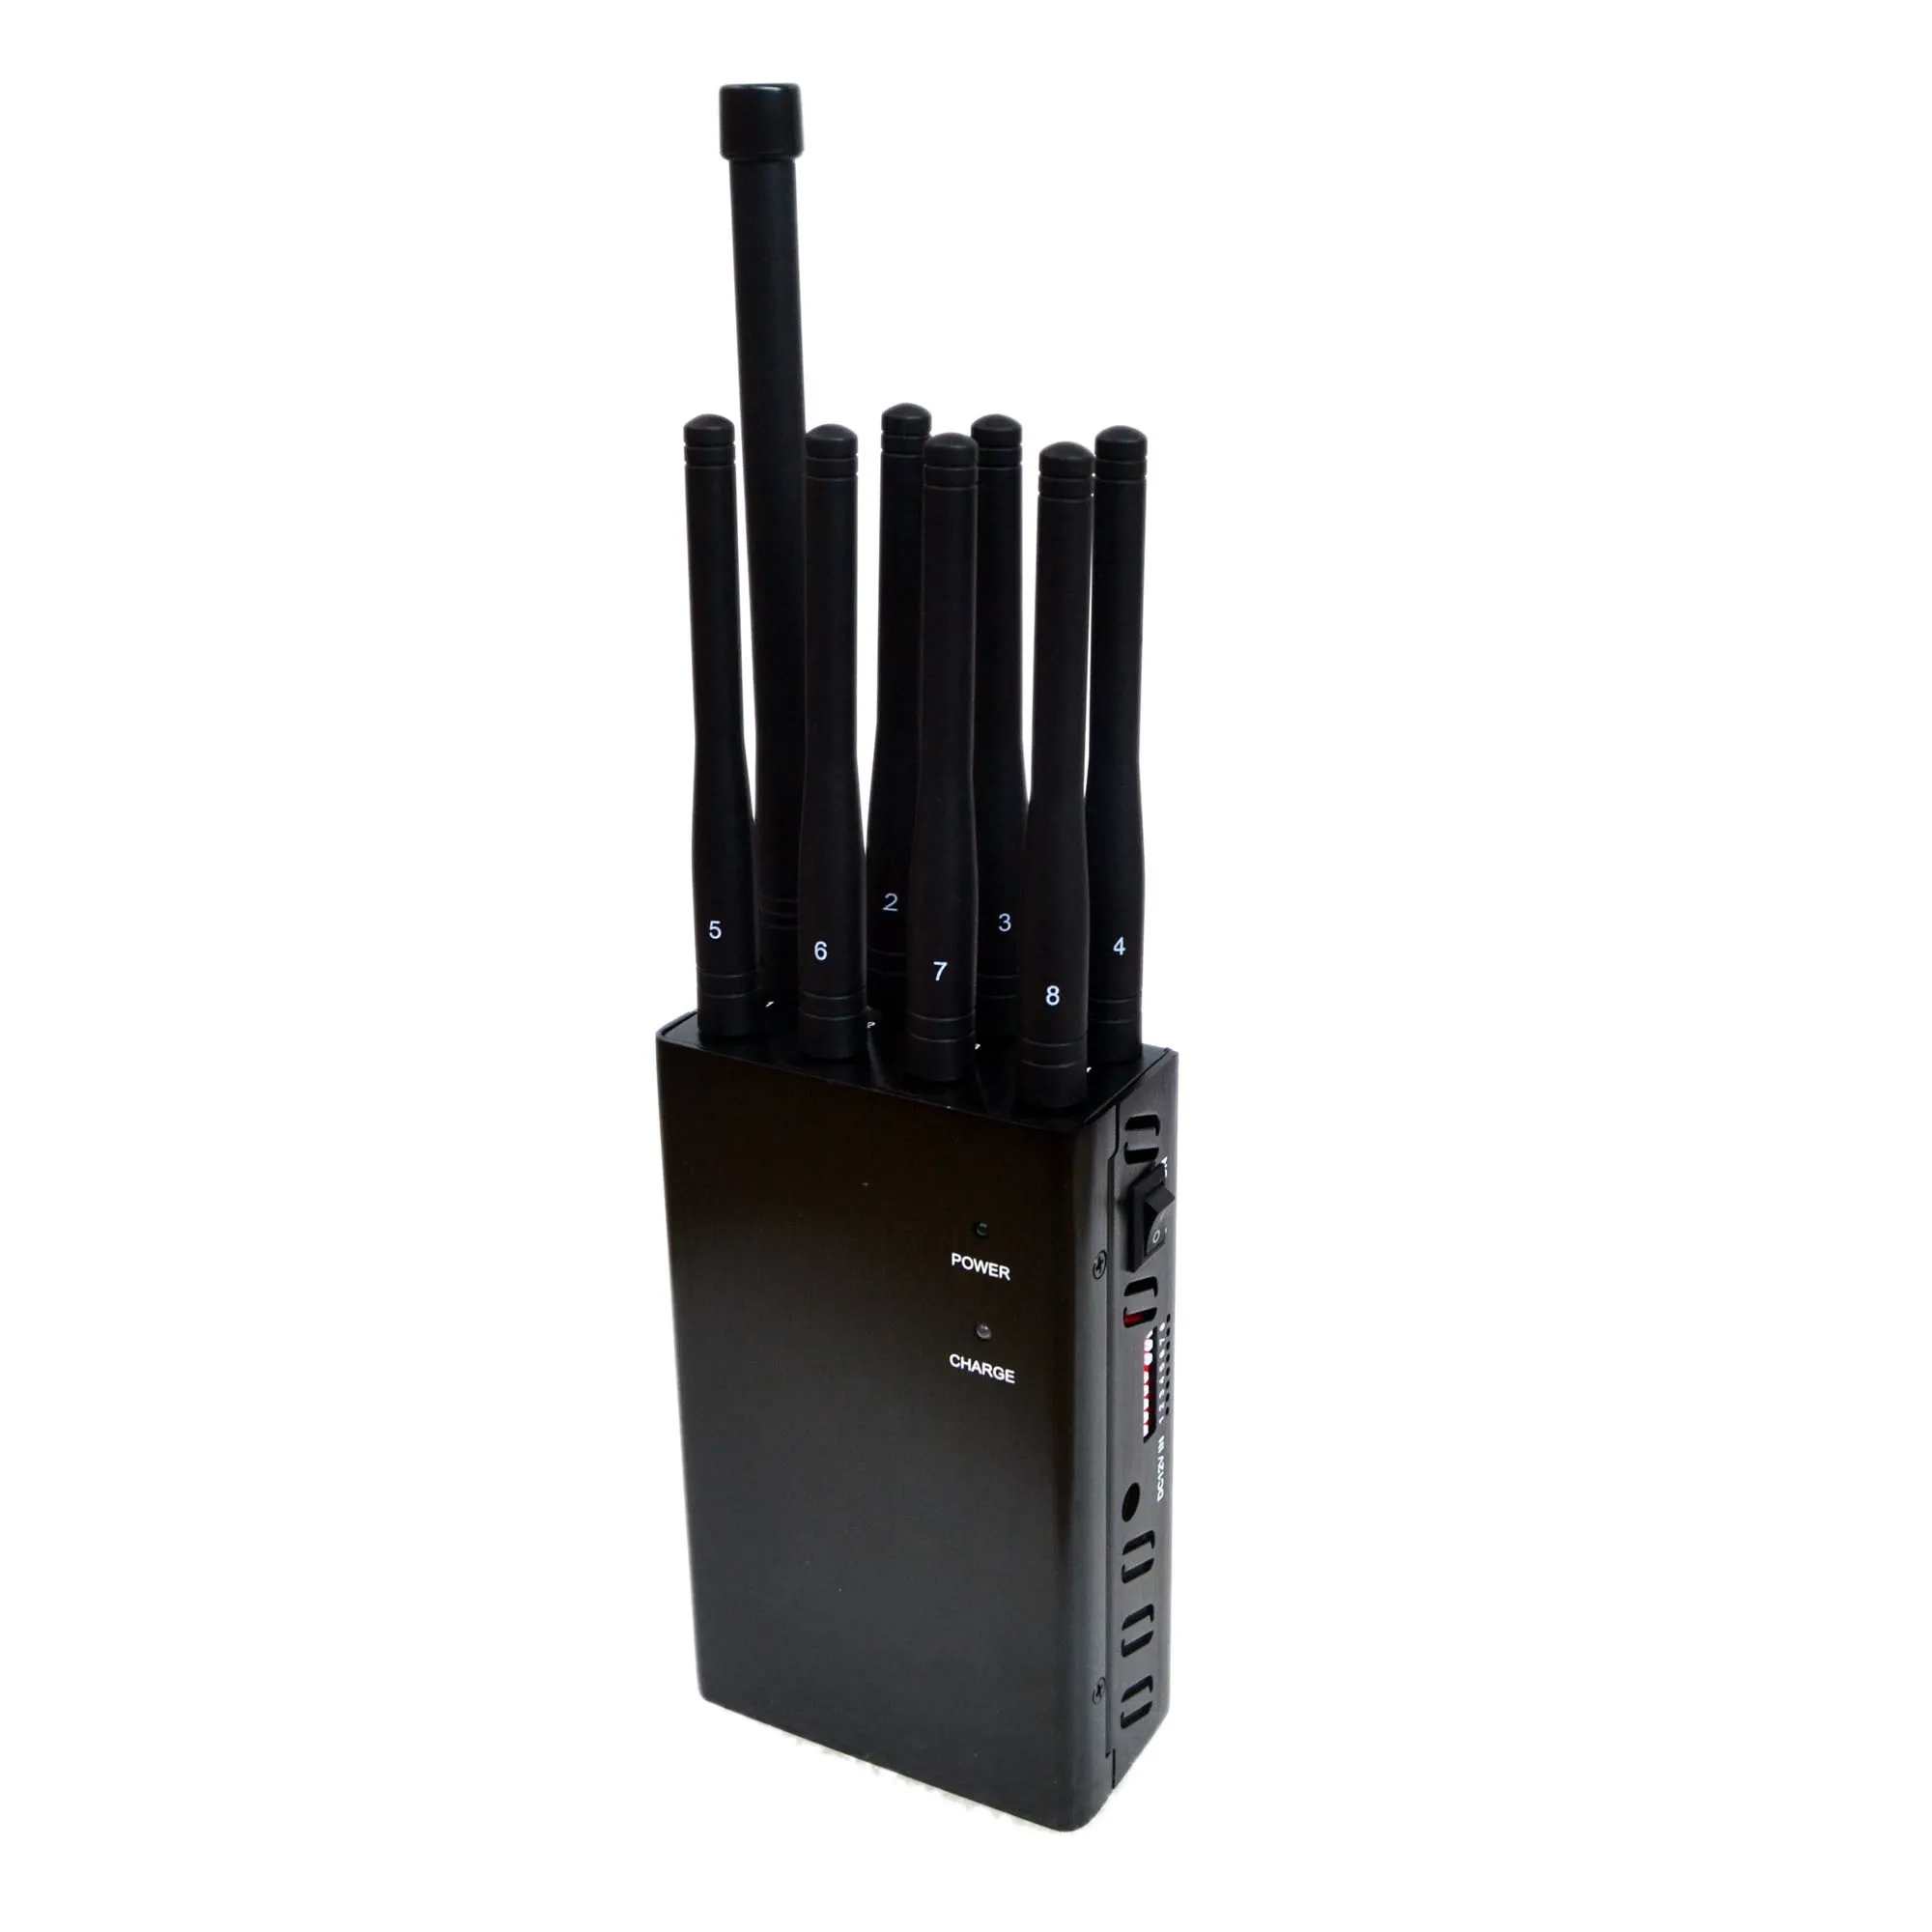 Cell Phone Jammer Blcok